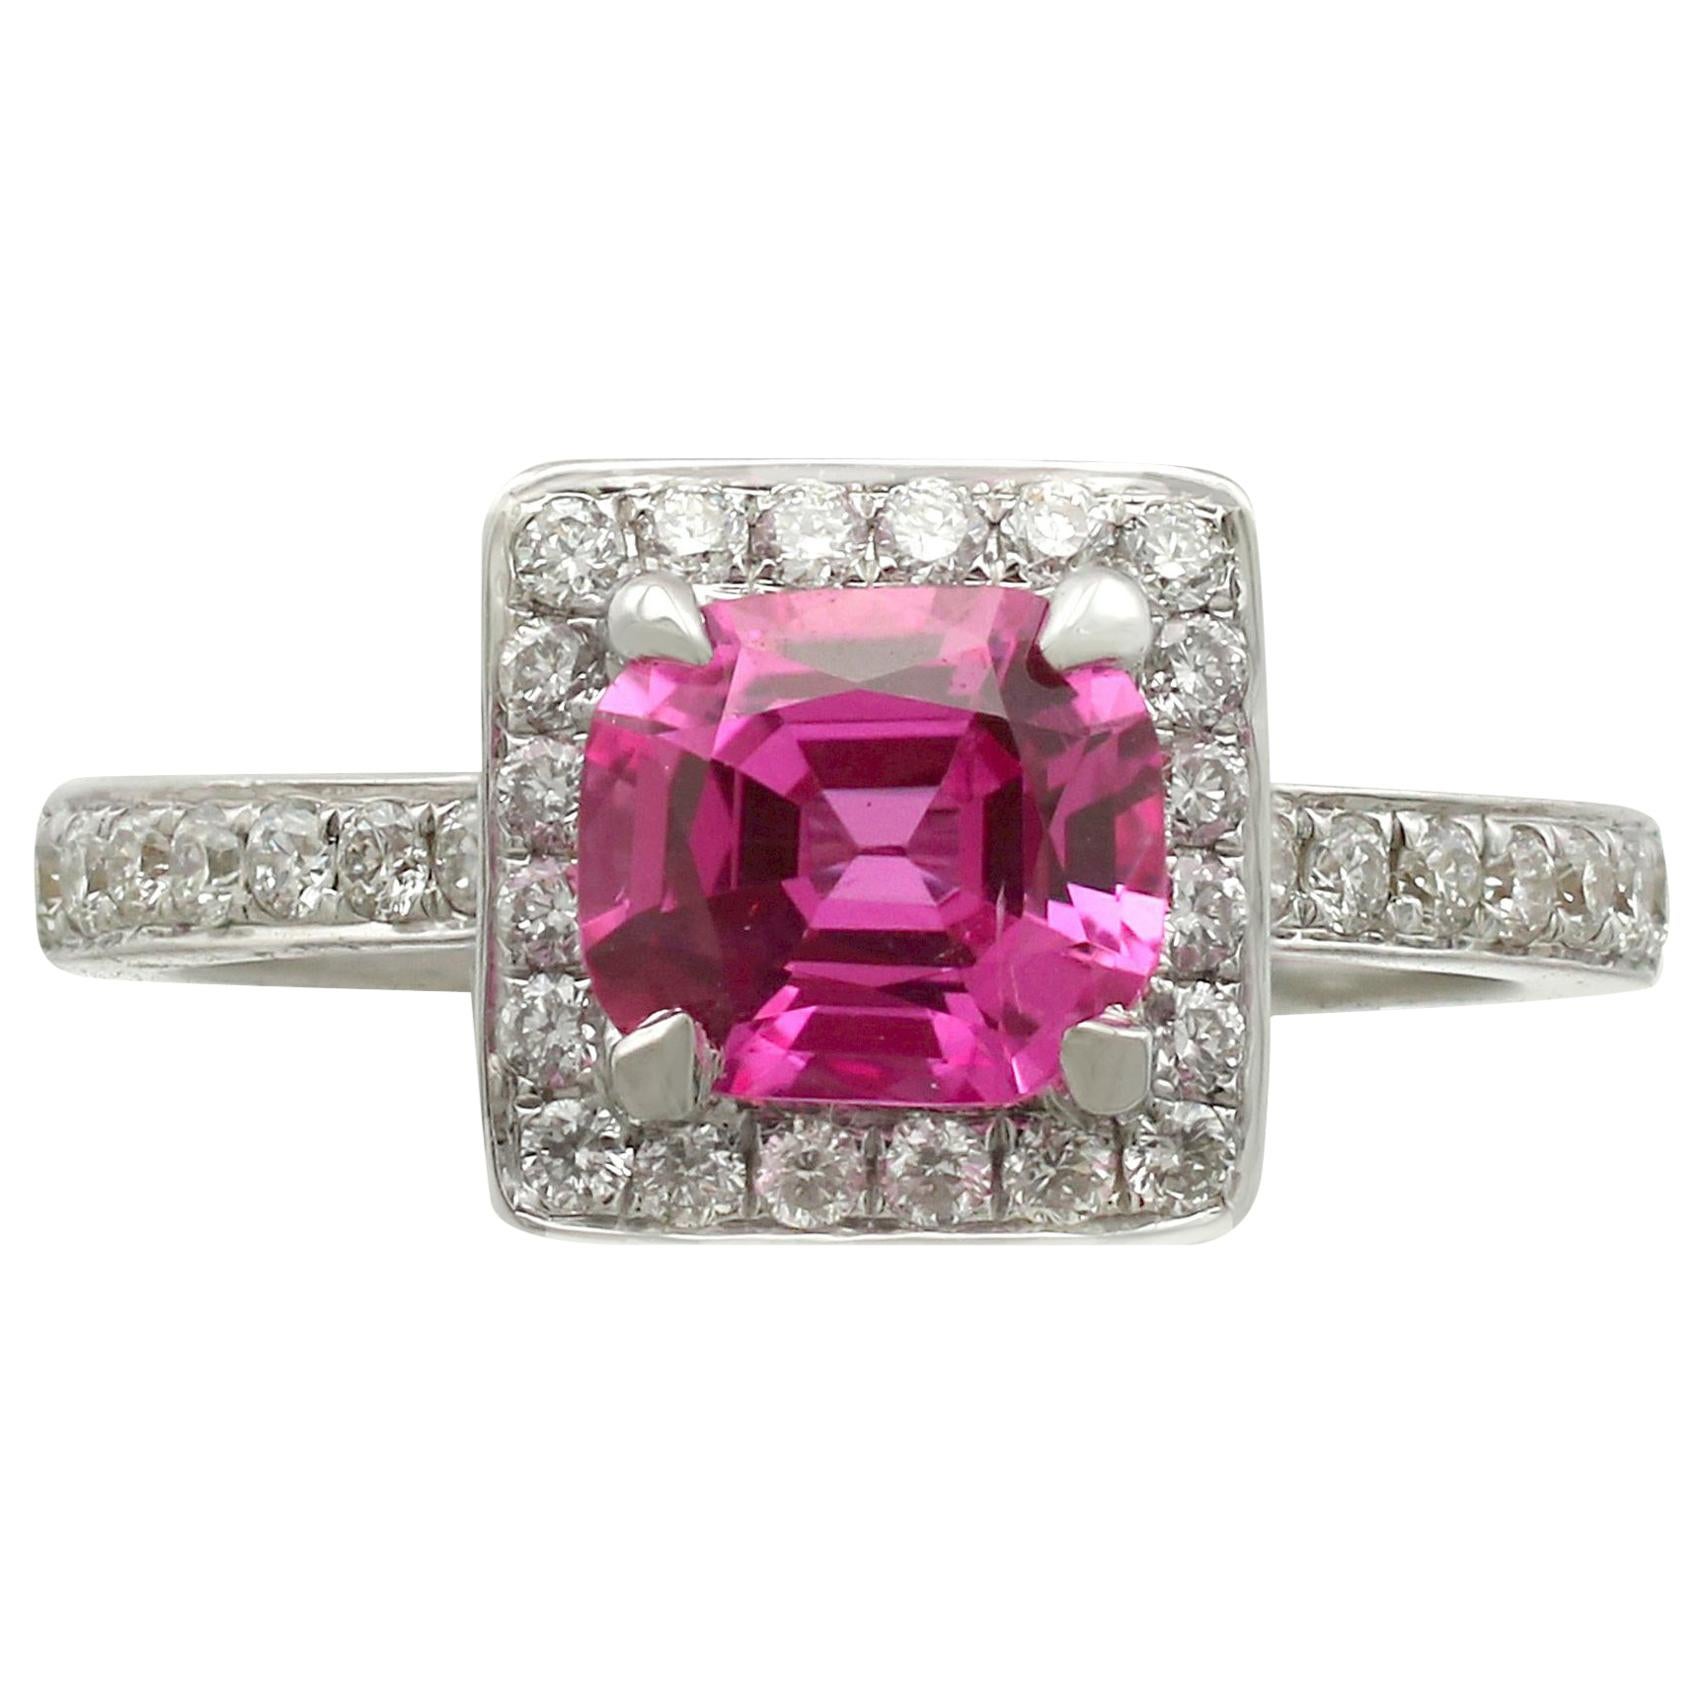 Vintage 1.27 Carat Pink Sapphire and Diamond White Gold Cocktail Ring Circa 1990